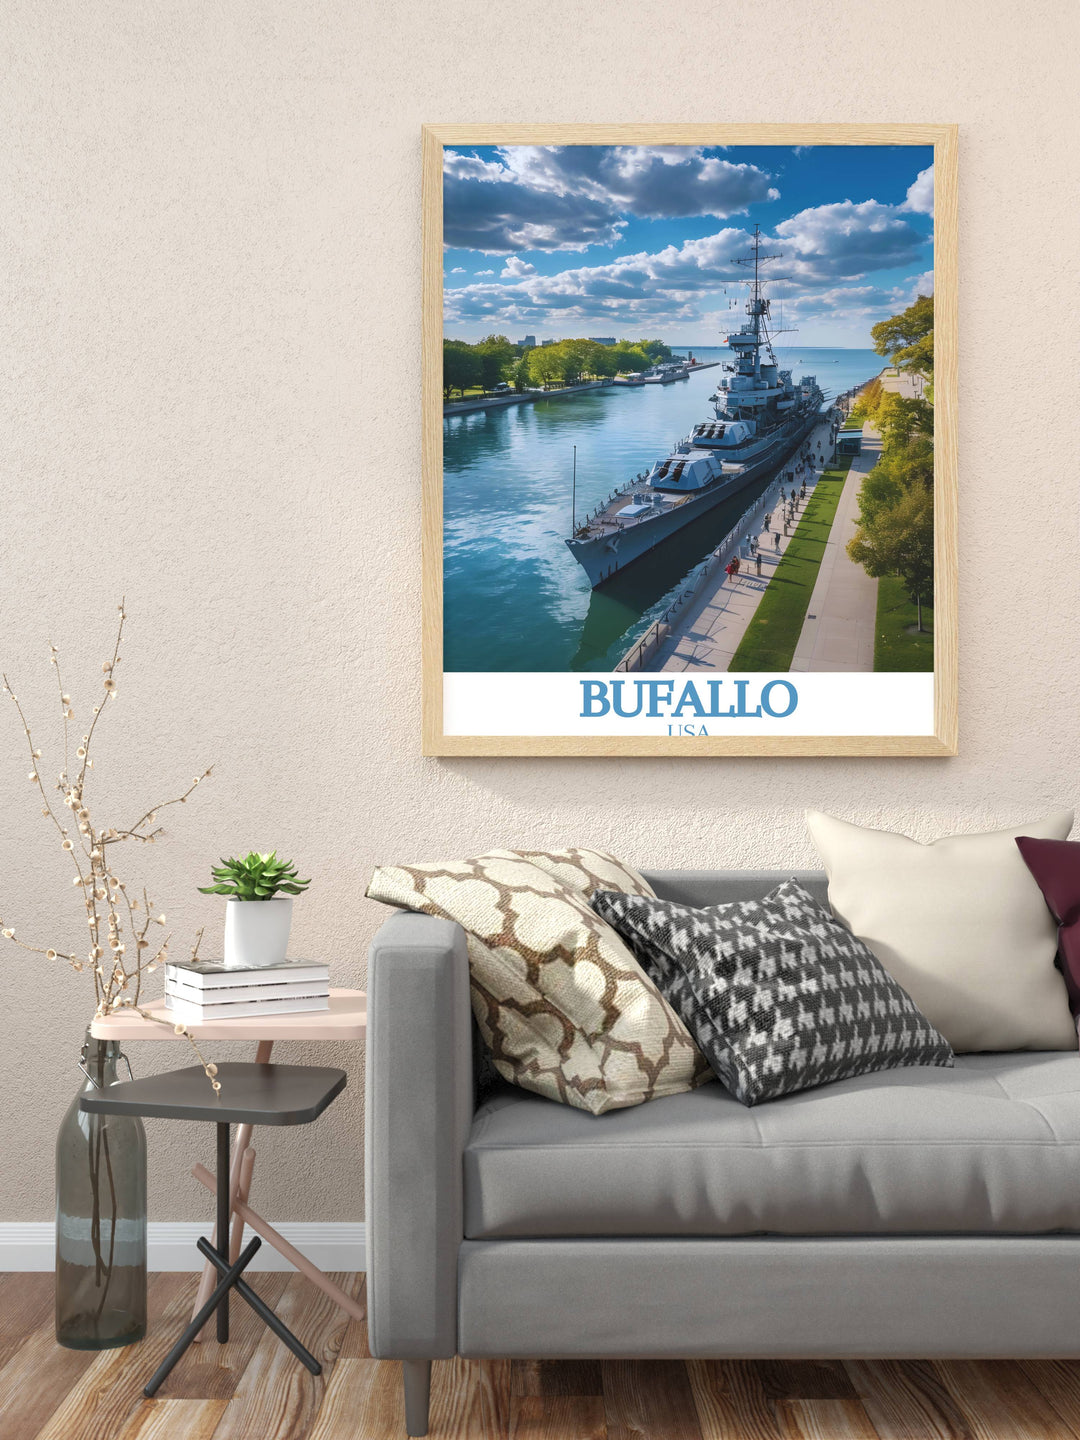 Buffalo Naval and Military Park prints offering a beautiful addition to your home decor or office space these prints celebrate the citys rich history and serve as a thoughtful personalized gift for any occasion